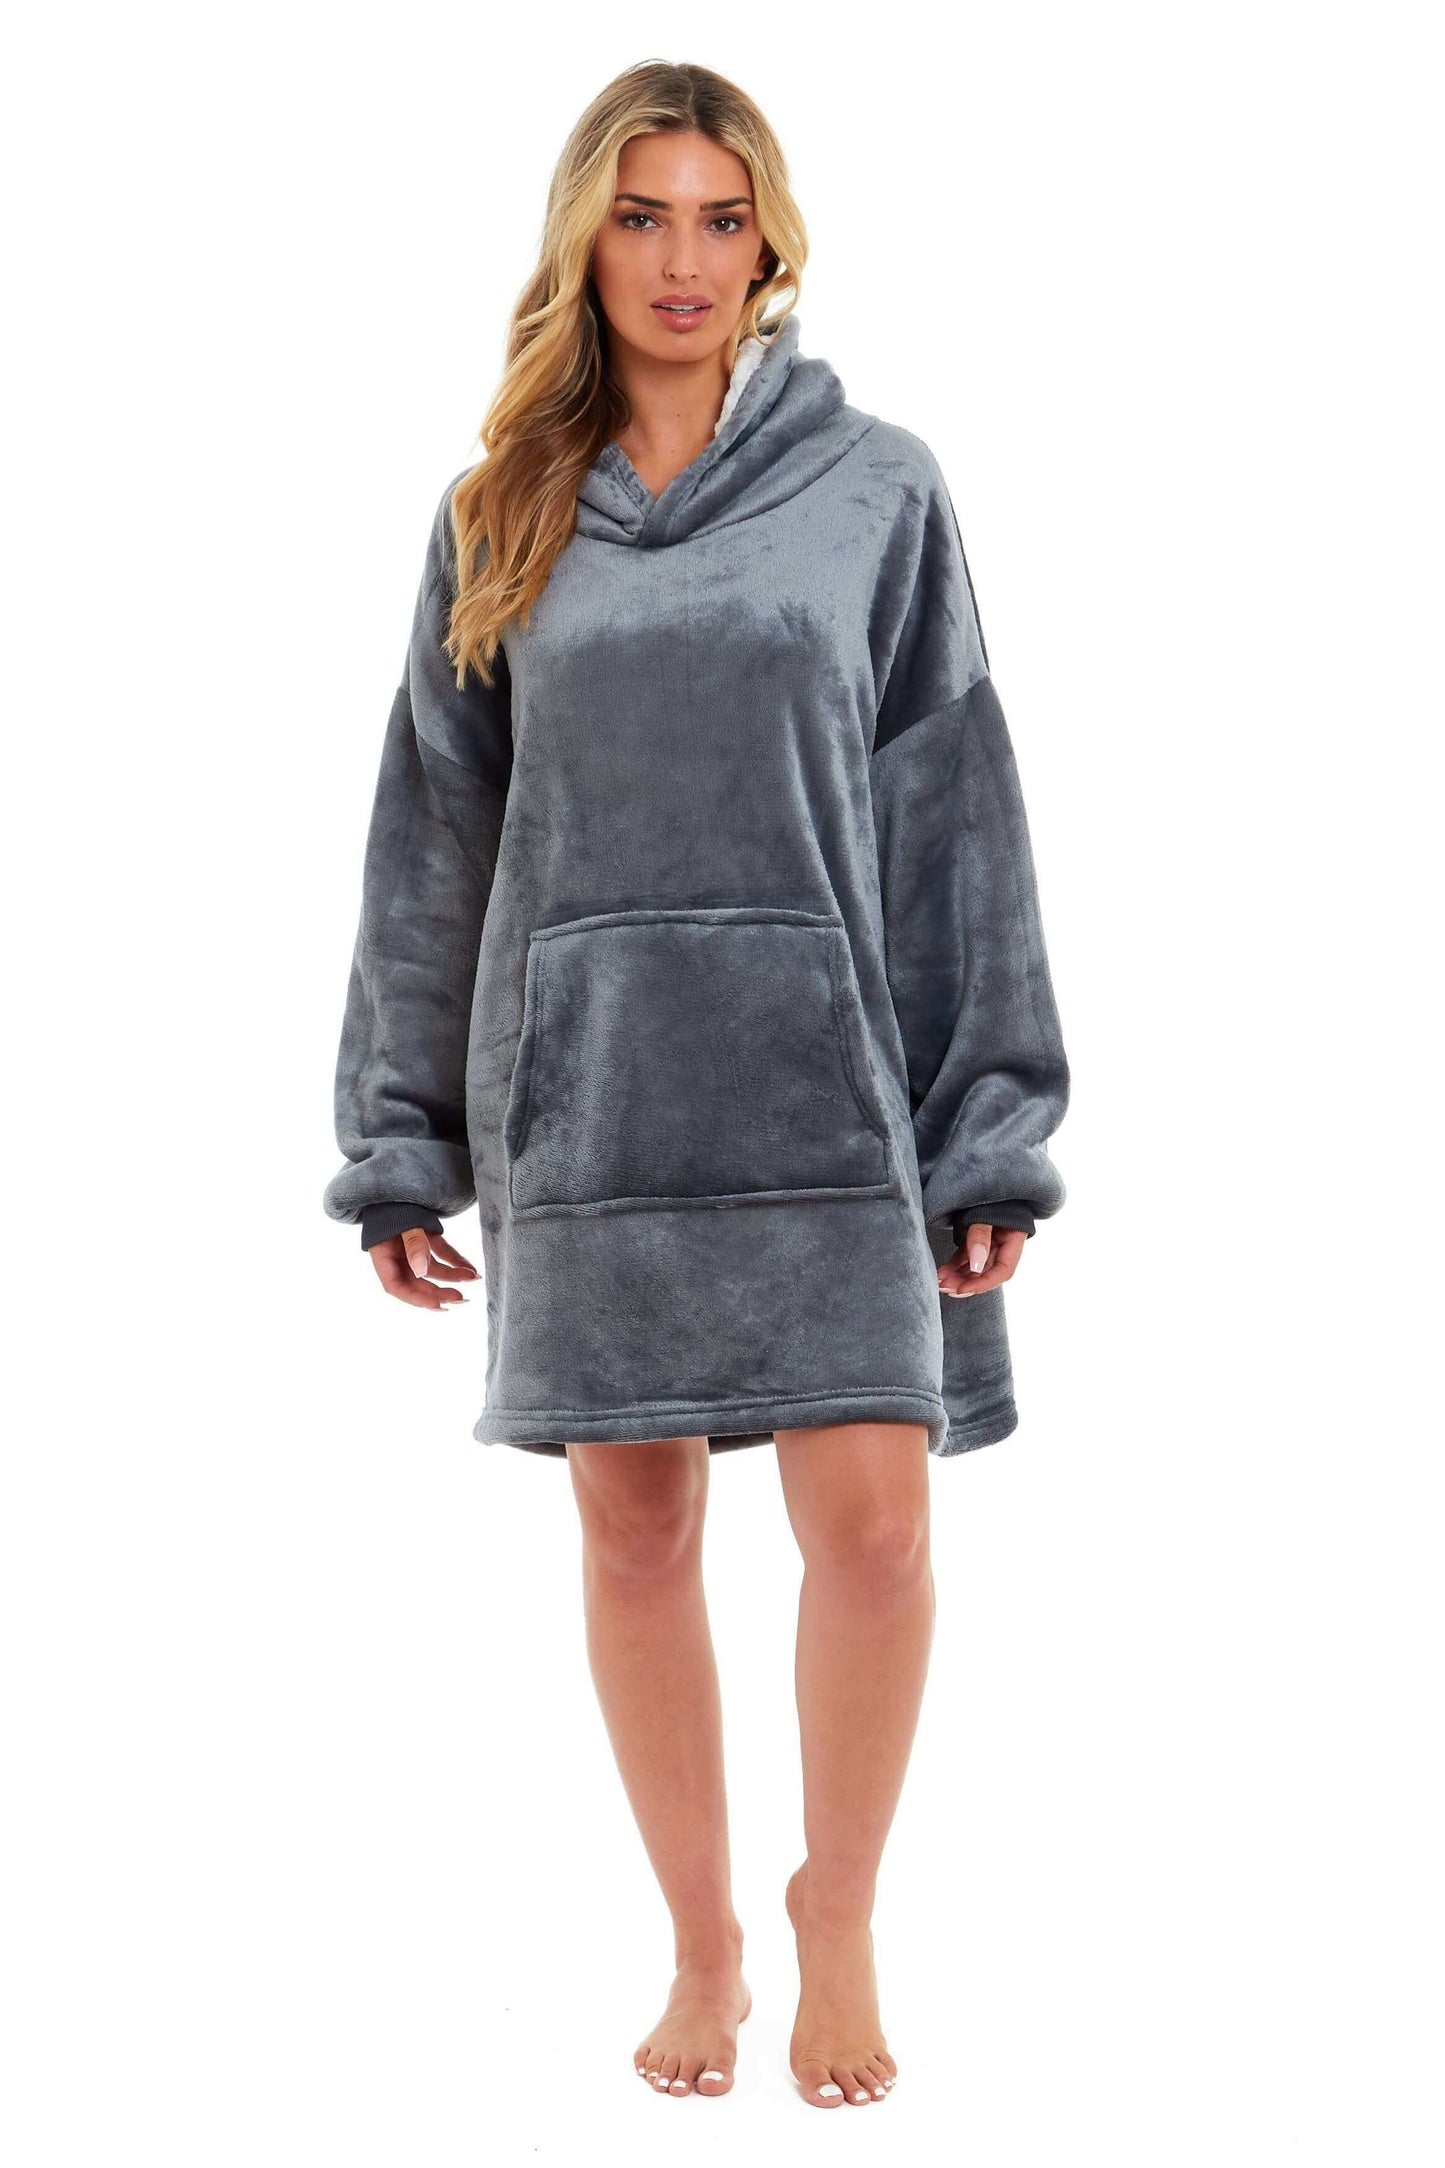 Oversized Grey & Pink Hooded Plush Fleece With Reversible Sherpa Blanket. Buy now for £20.00. A Hooded Blanket by Daisy Dreamer. charcoal, clothing, daisy dreamer, flannel, fleece, grey, hooded blanket, kids, ladies, loungewear, nightwear, oodie, oversize